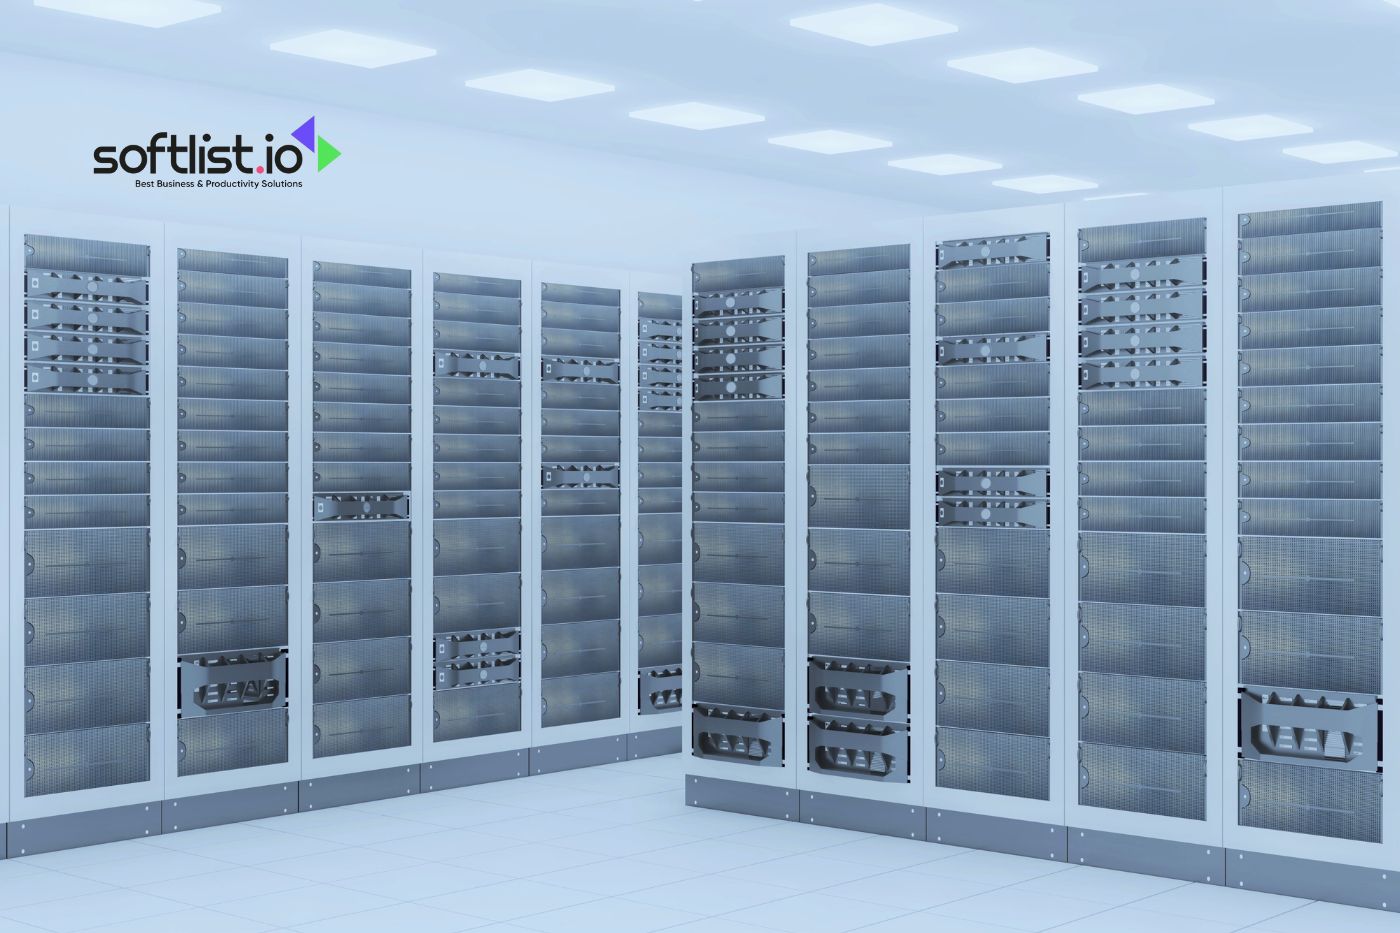 Brightly lit data center with multiple server racks in white cabinets